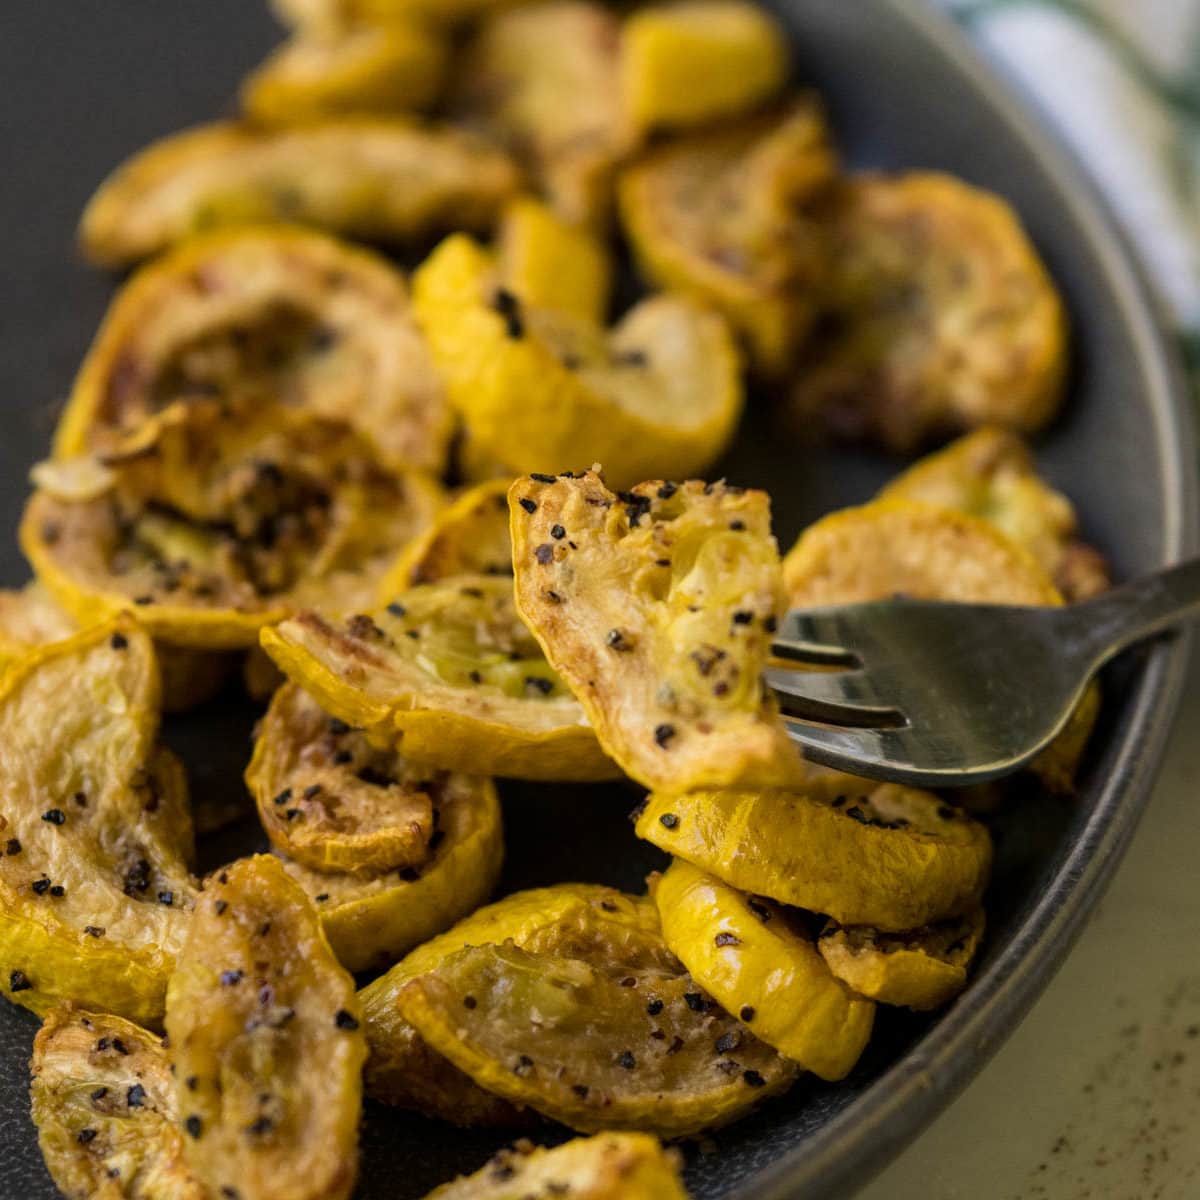 Air fryer yellow squash on a fork with more squash pieces in the background on a plate.